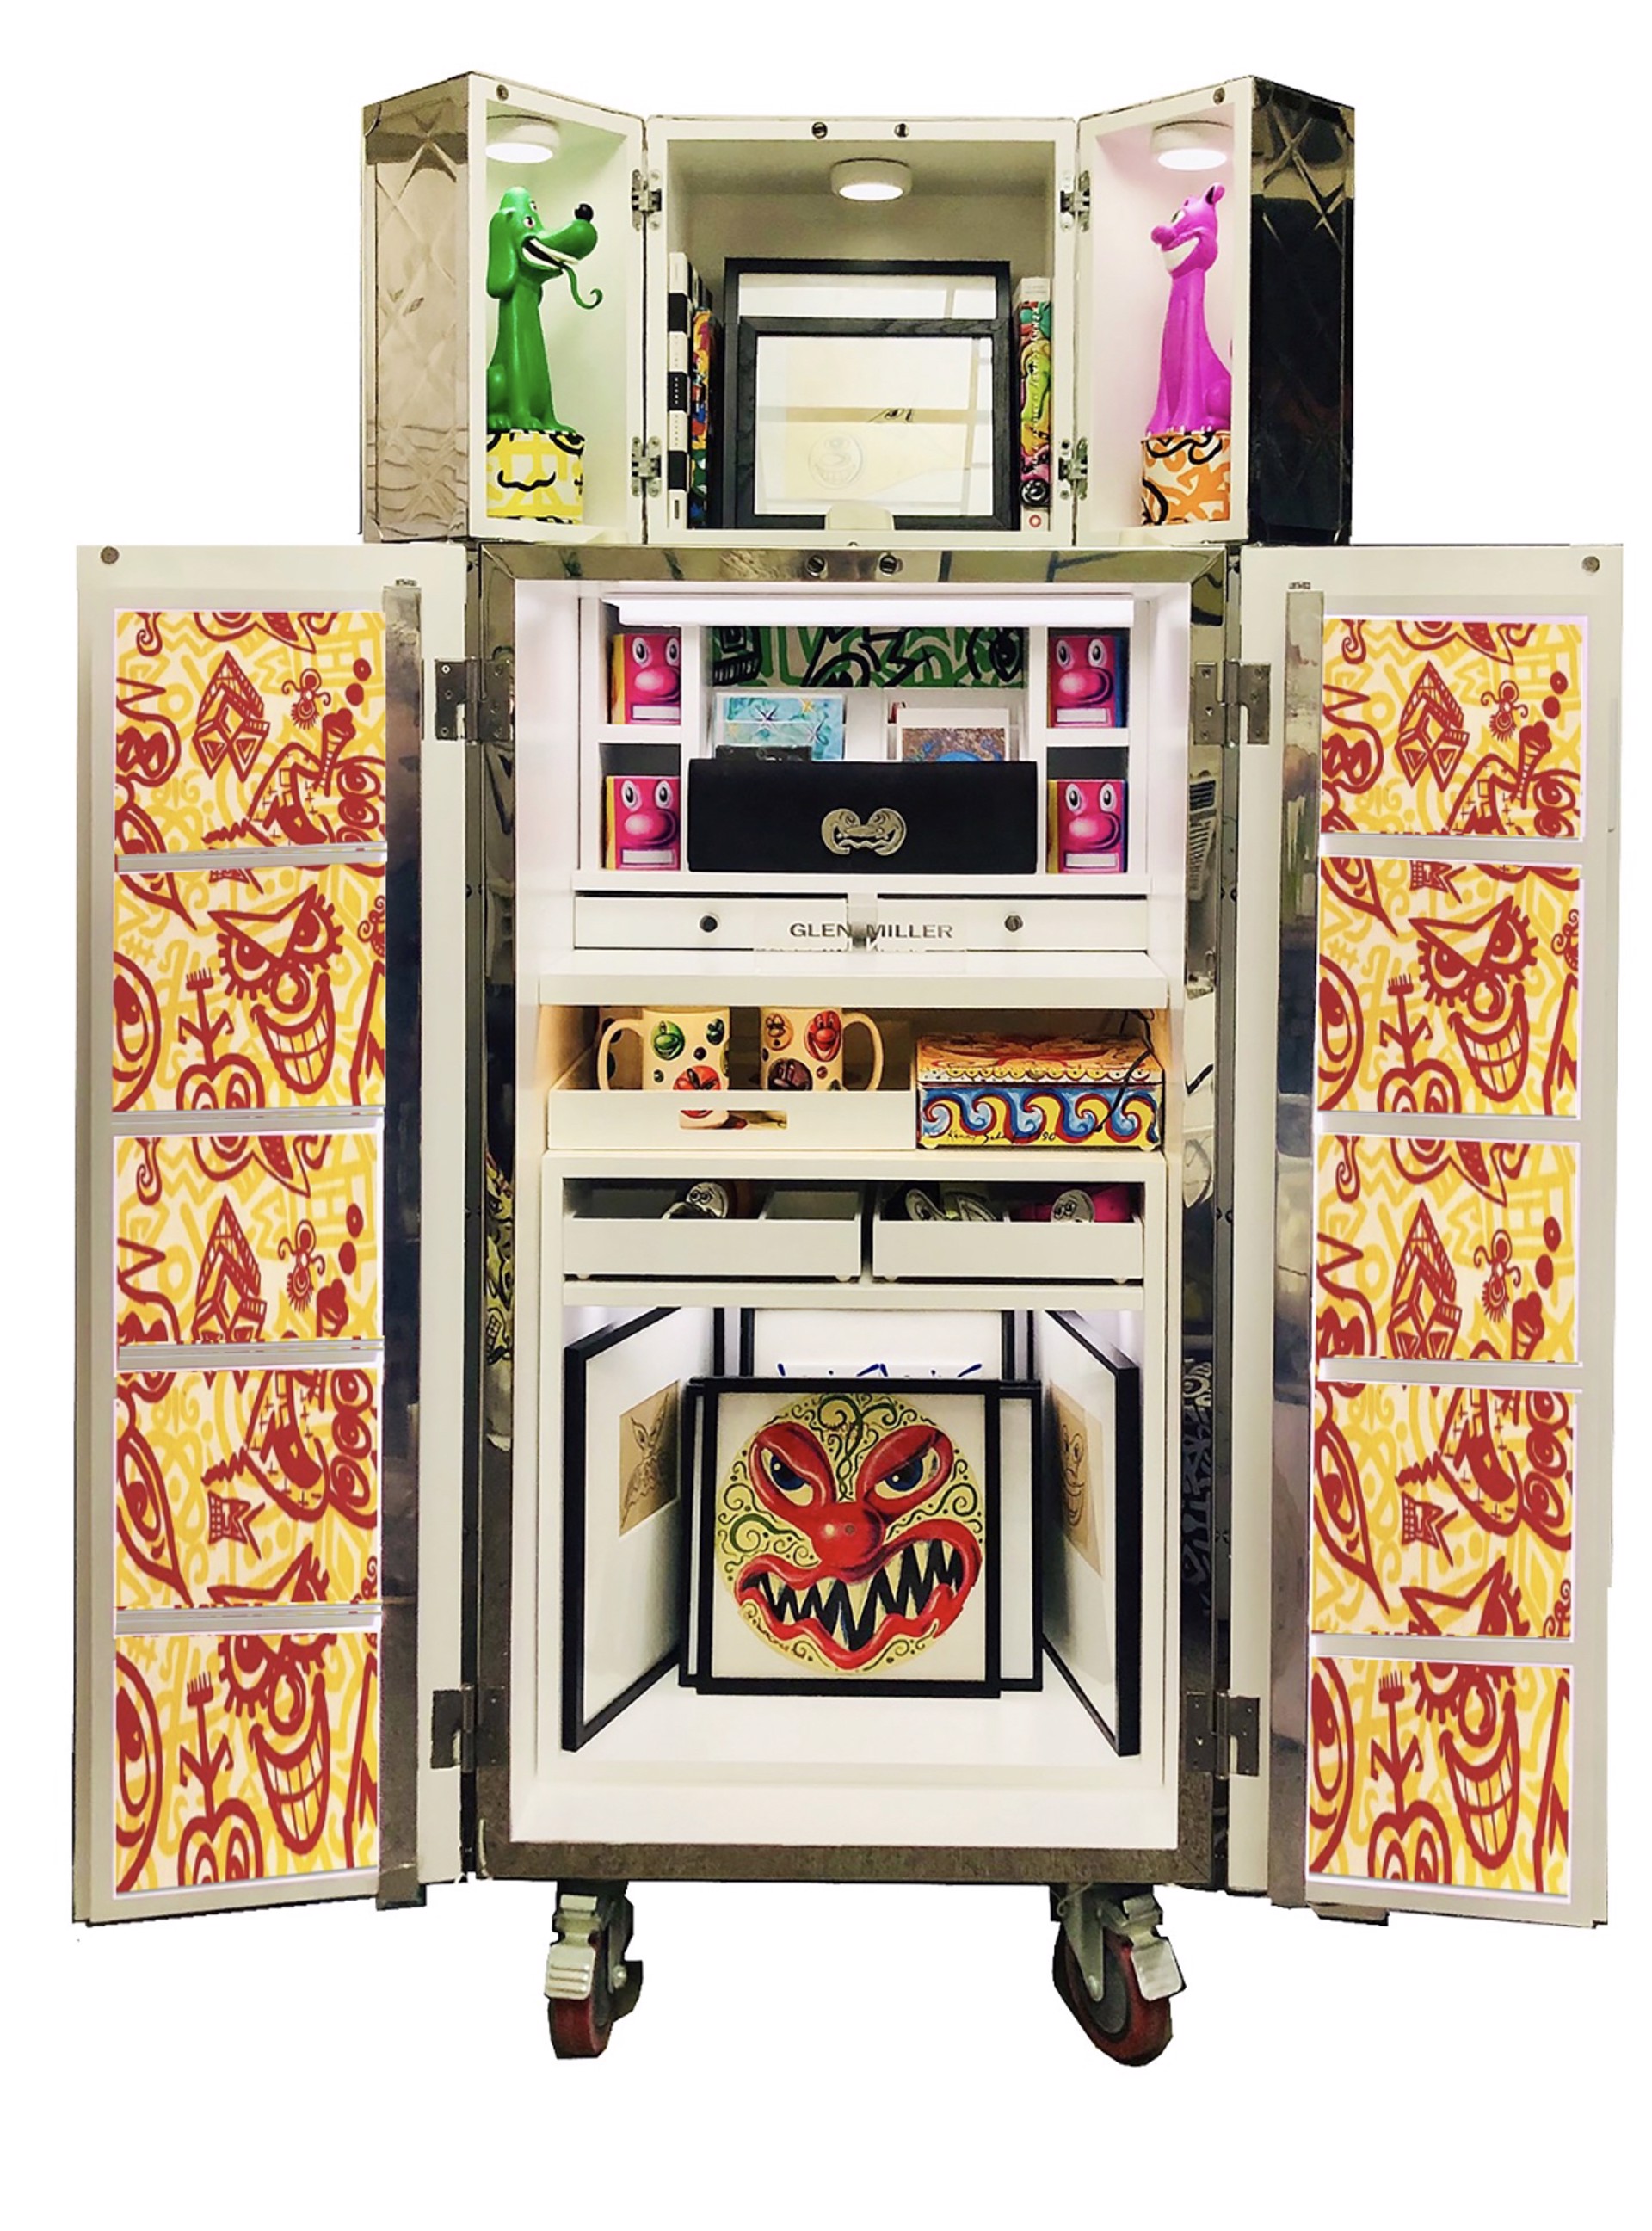 Kosmic Cabinet (Filled with Kenny Scharf) by Glen Miller